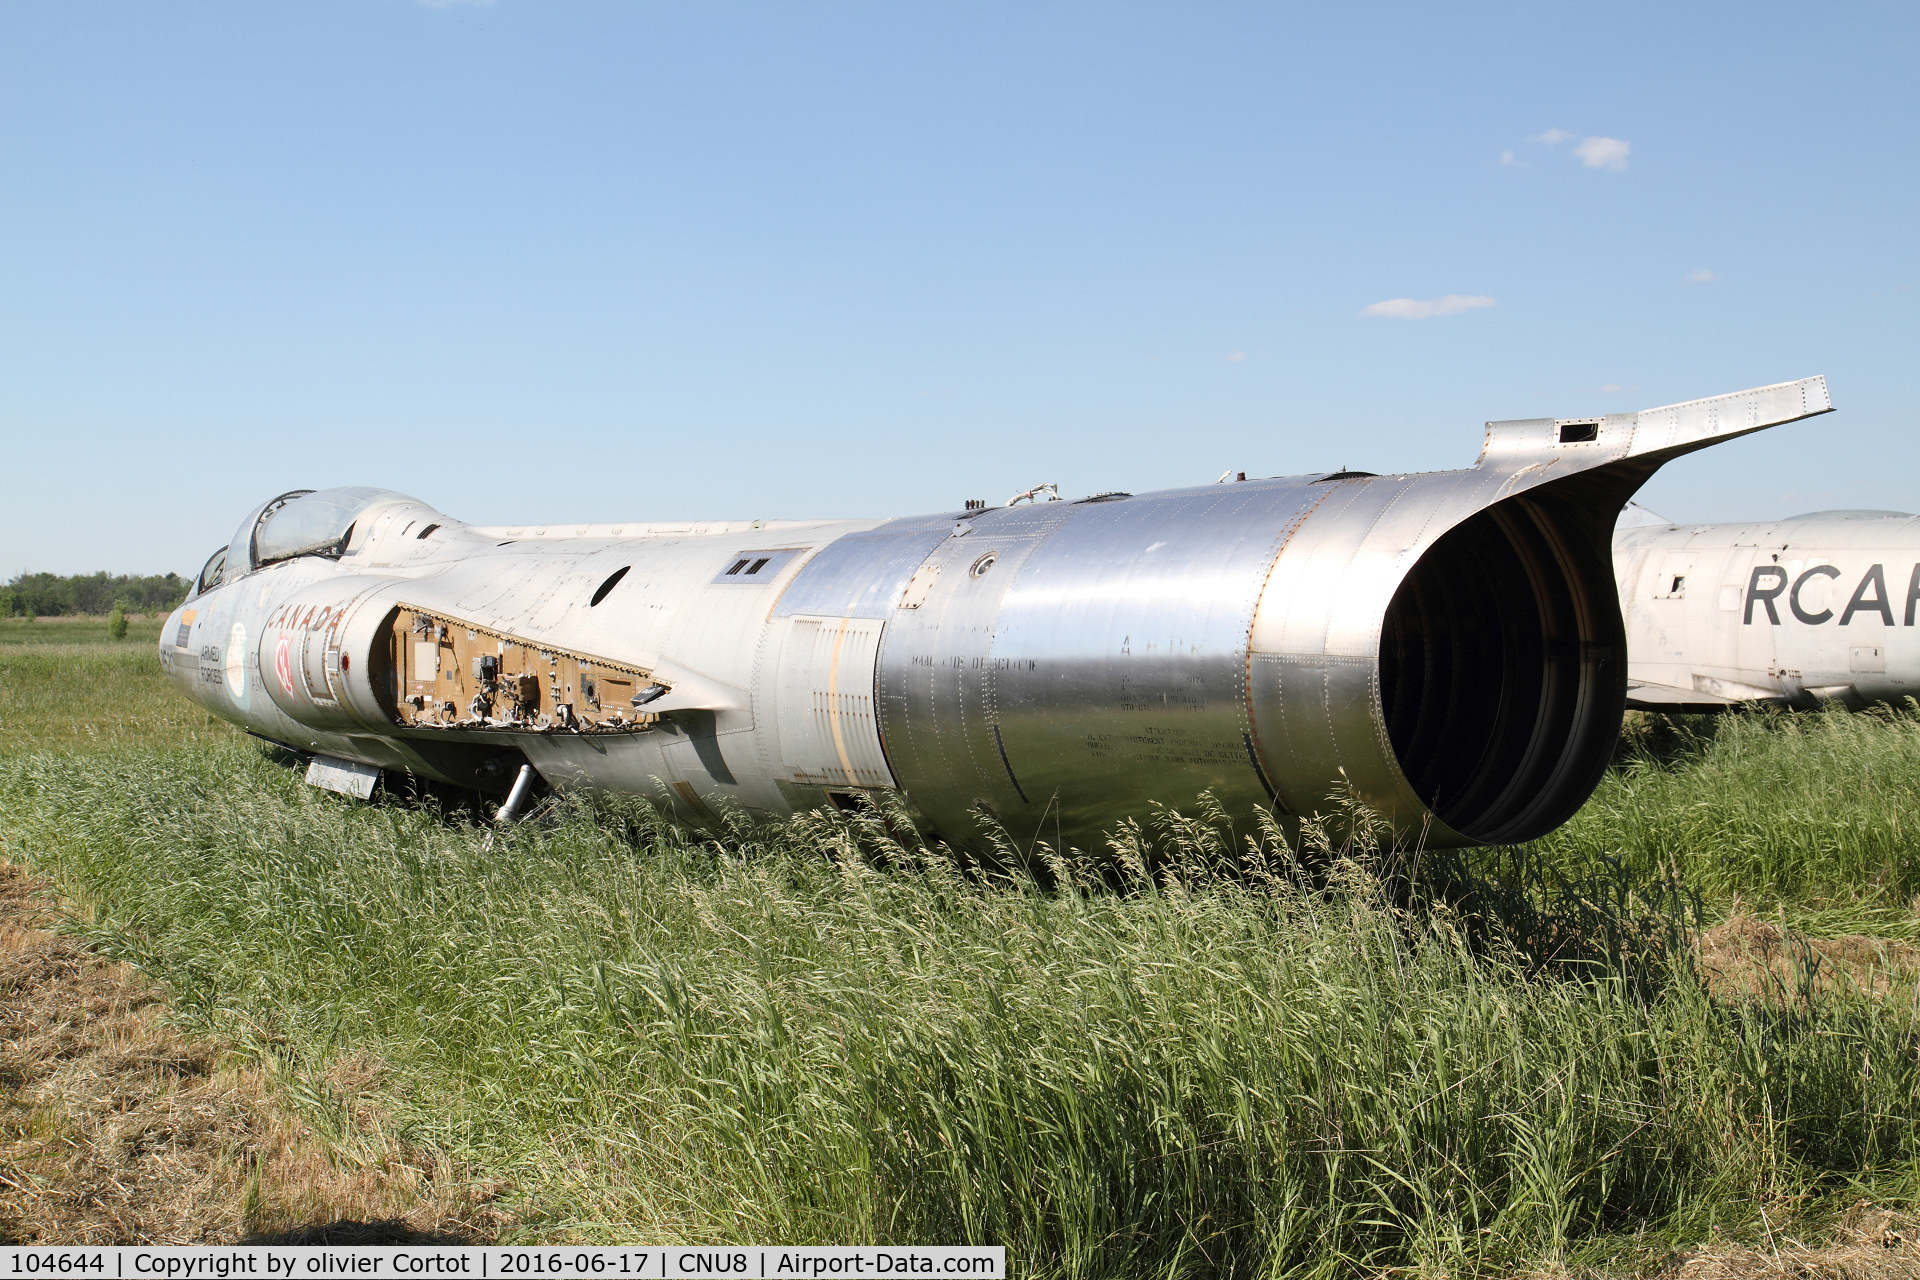 104644, Lockheed CF-104D Starfighter C/N 583A-5314, remains of a F-104